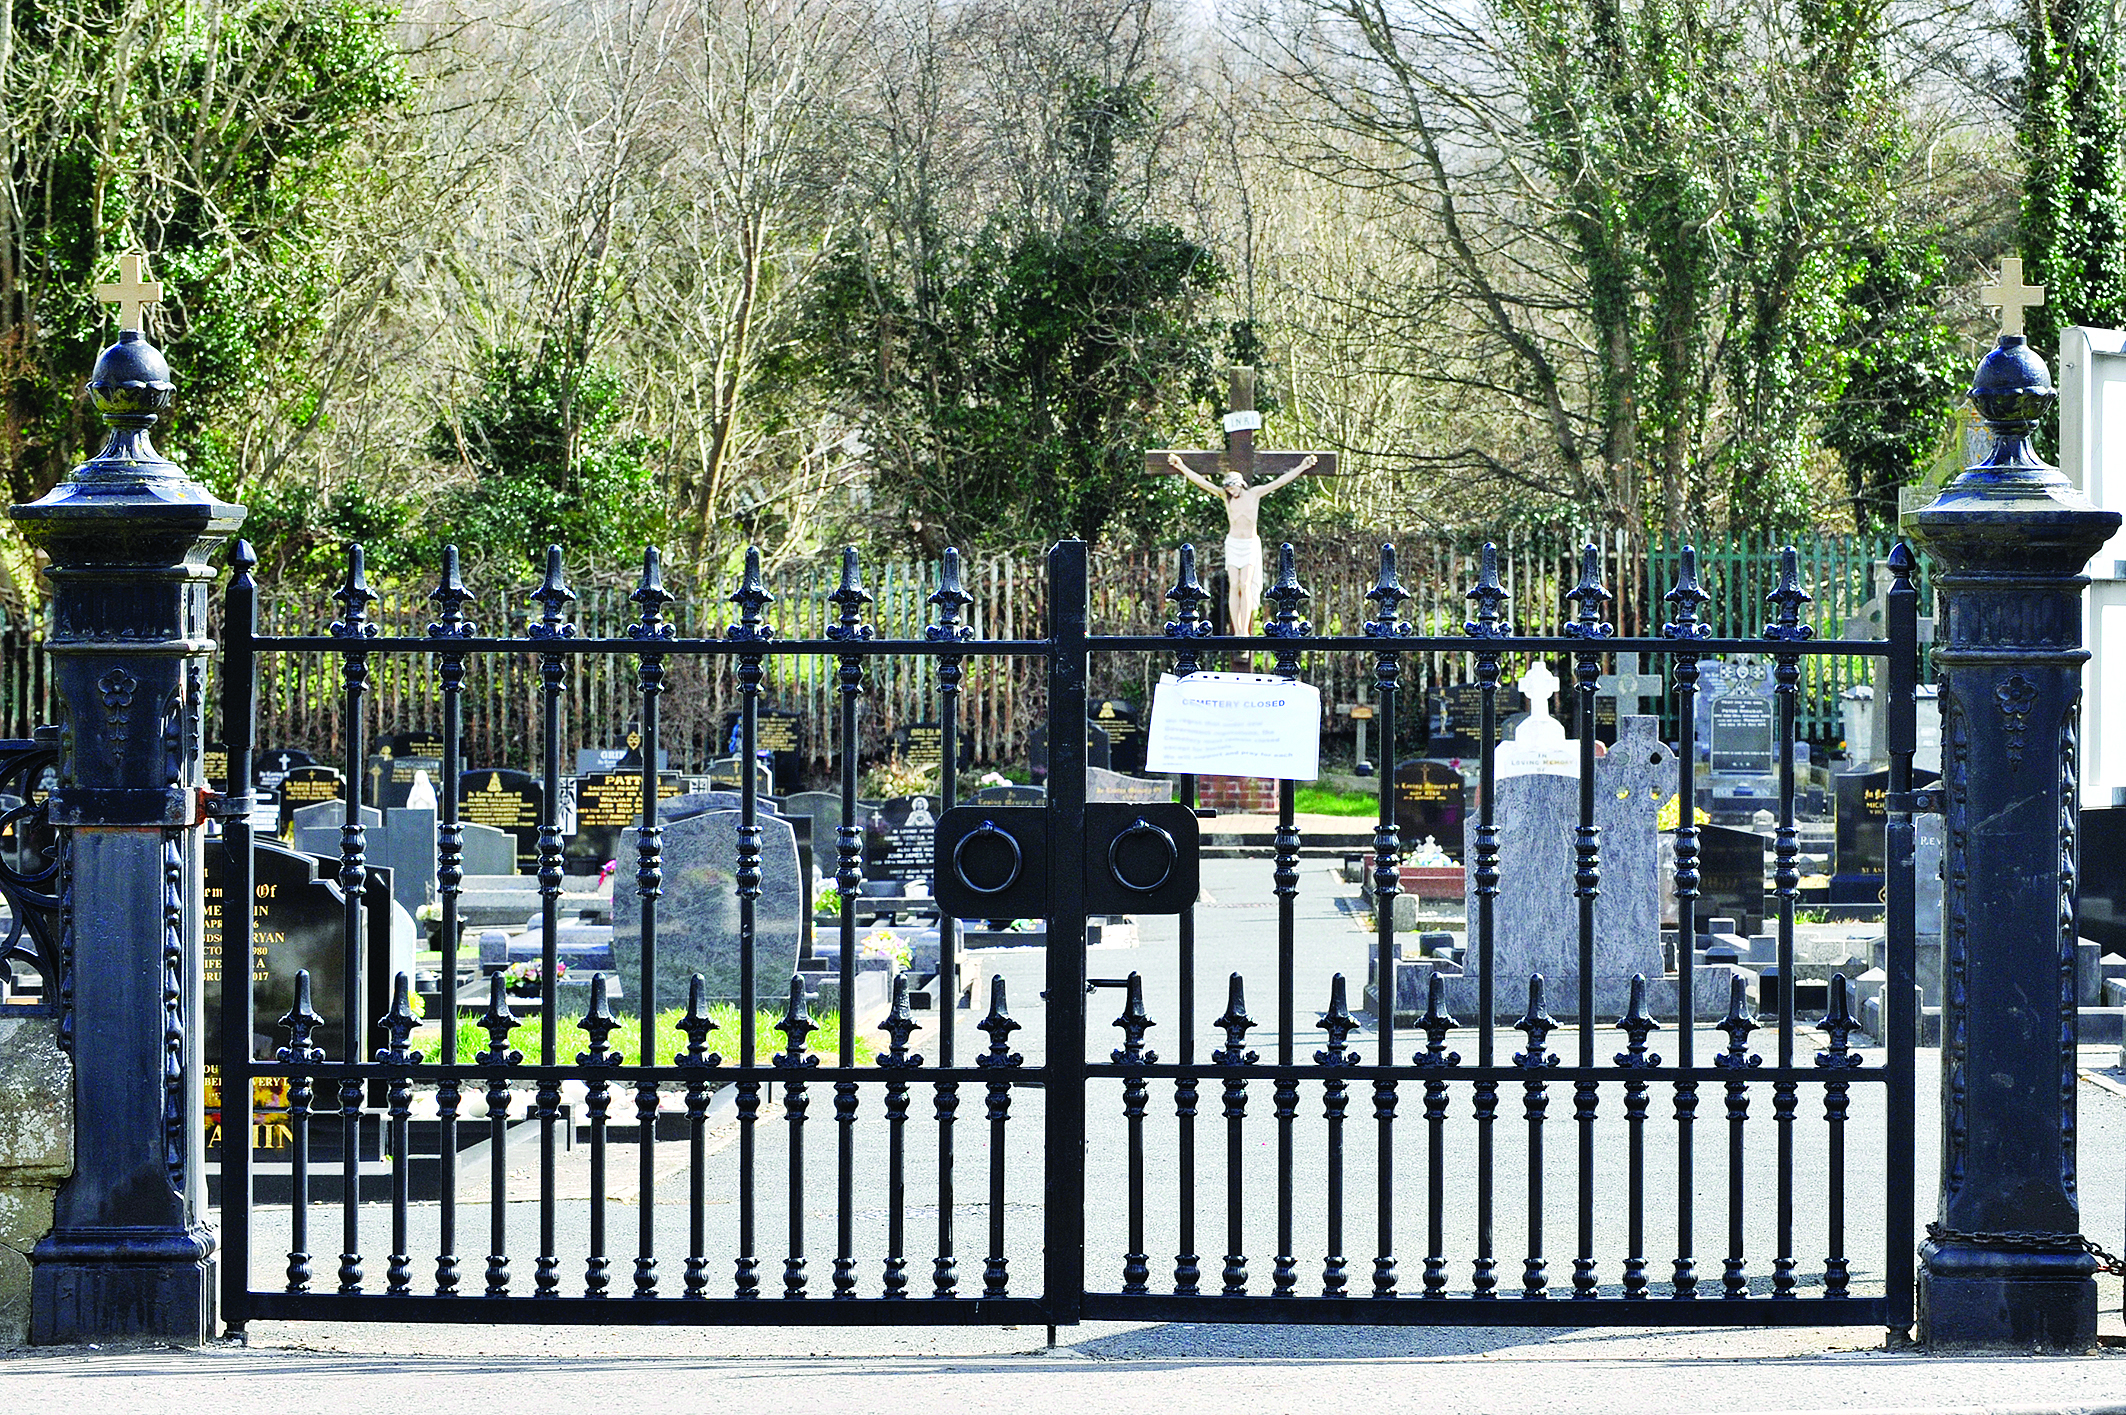 Appeals made over cemetery closures